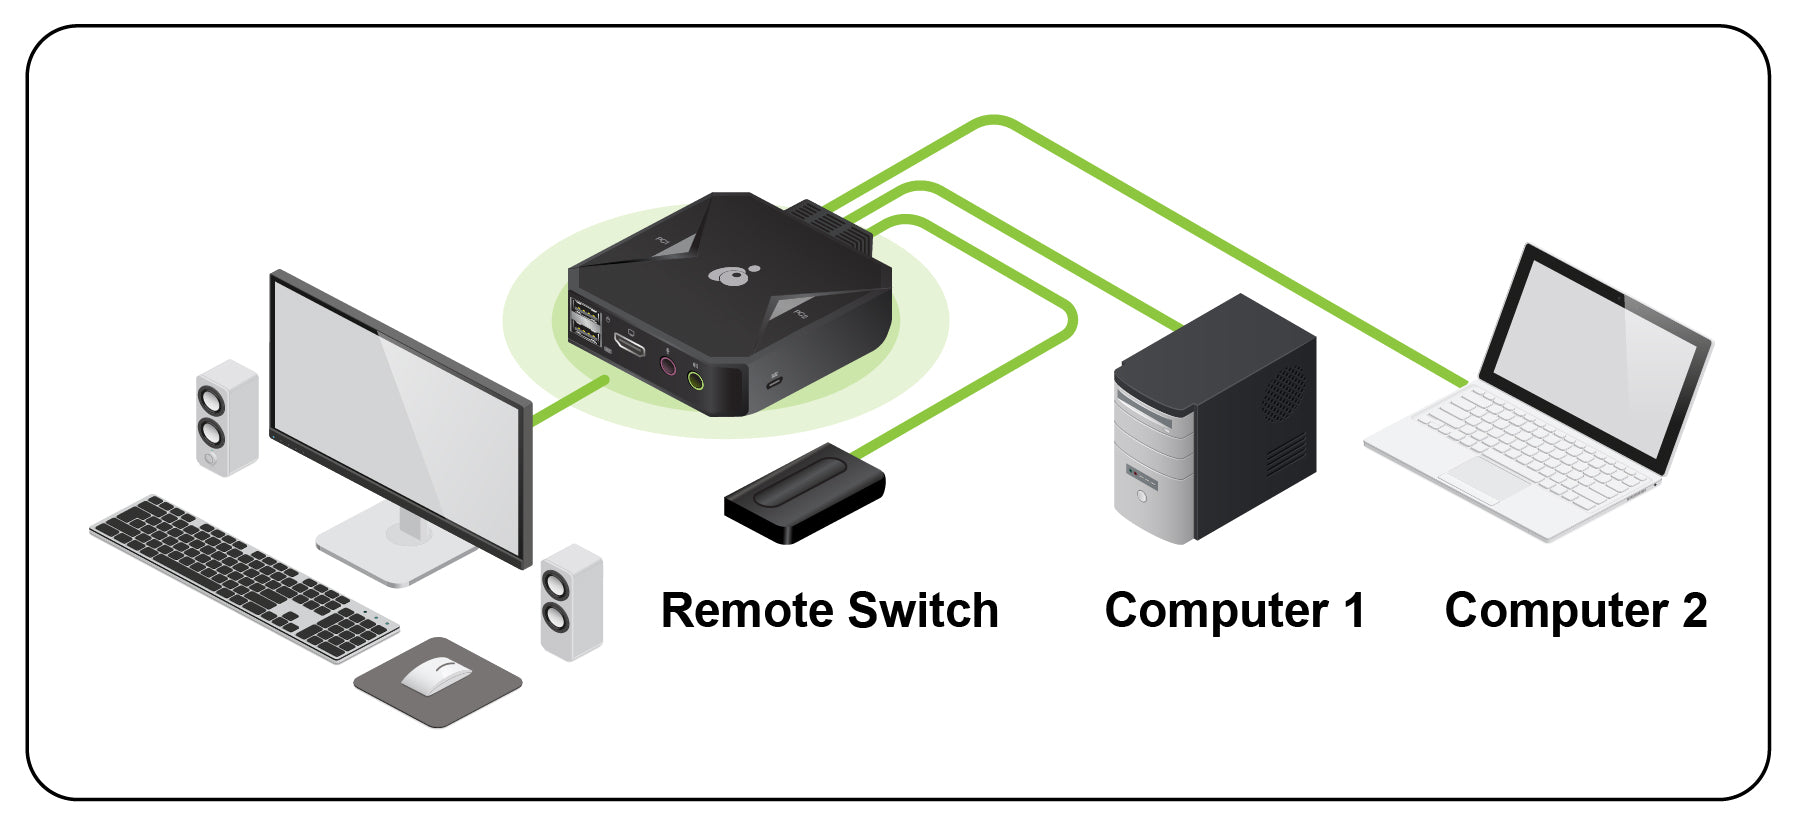 2-Port 4K KVM Switch with HDMI, USB and Audio Connections